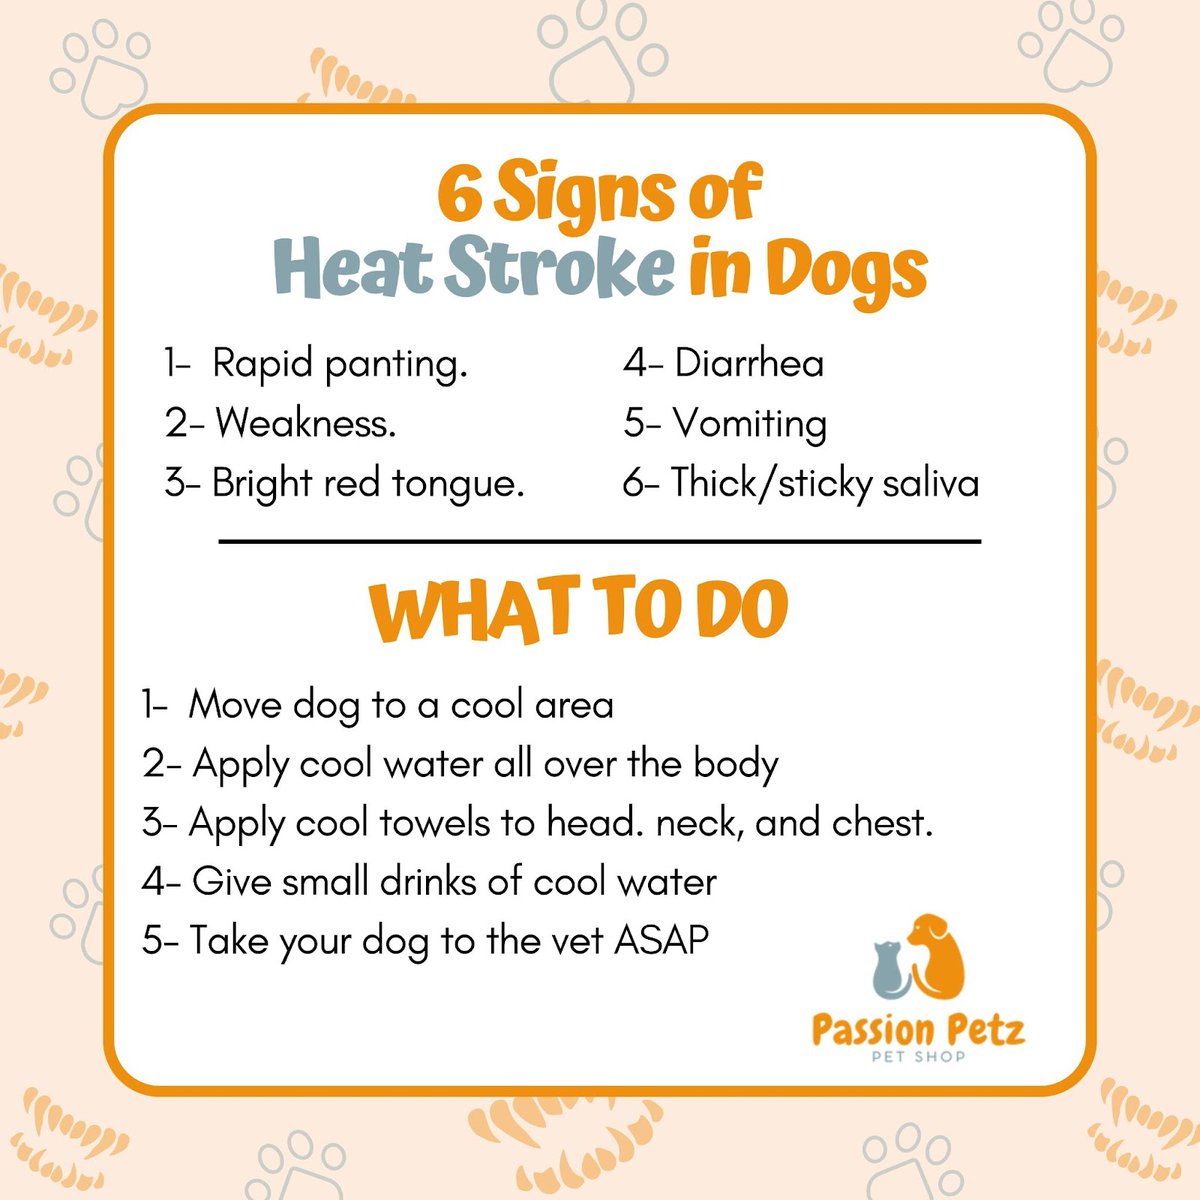 Crucial information! Pet owners must be aware of heatstroke's dangers, especially during a heatwave.
.
Visit us now at! passionpetz.com 
.
#PetSafety #HeatstrokeAwareness #SummerSafety #PetHealth #HeatwavePrevention #PetWellness #StayCoolPets #PetCareTips